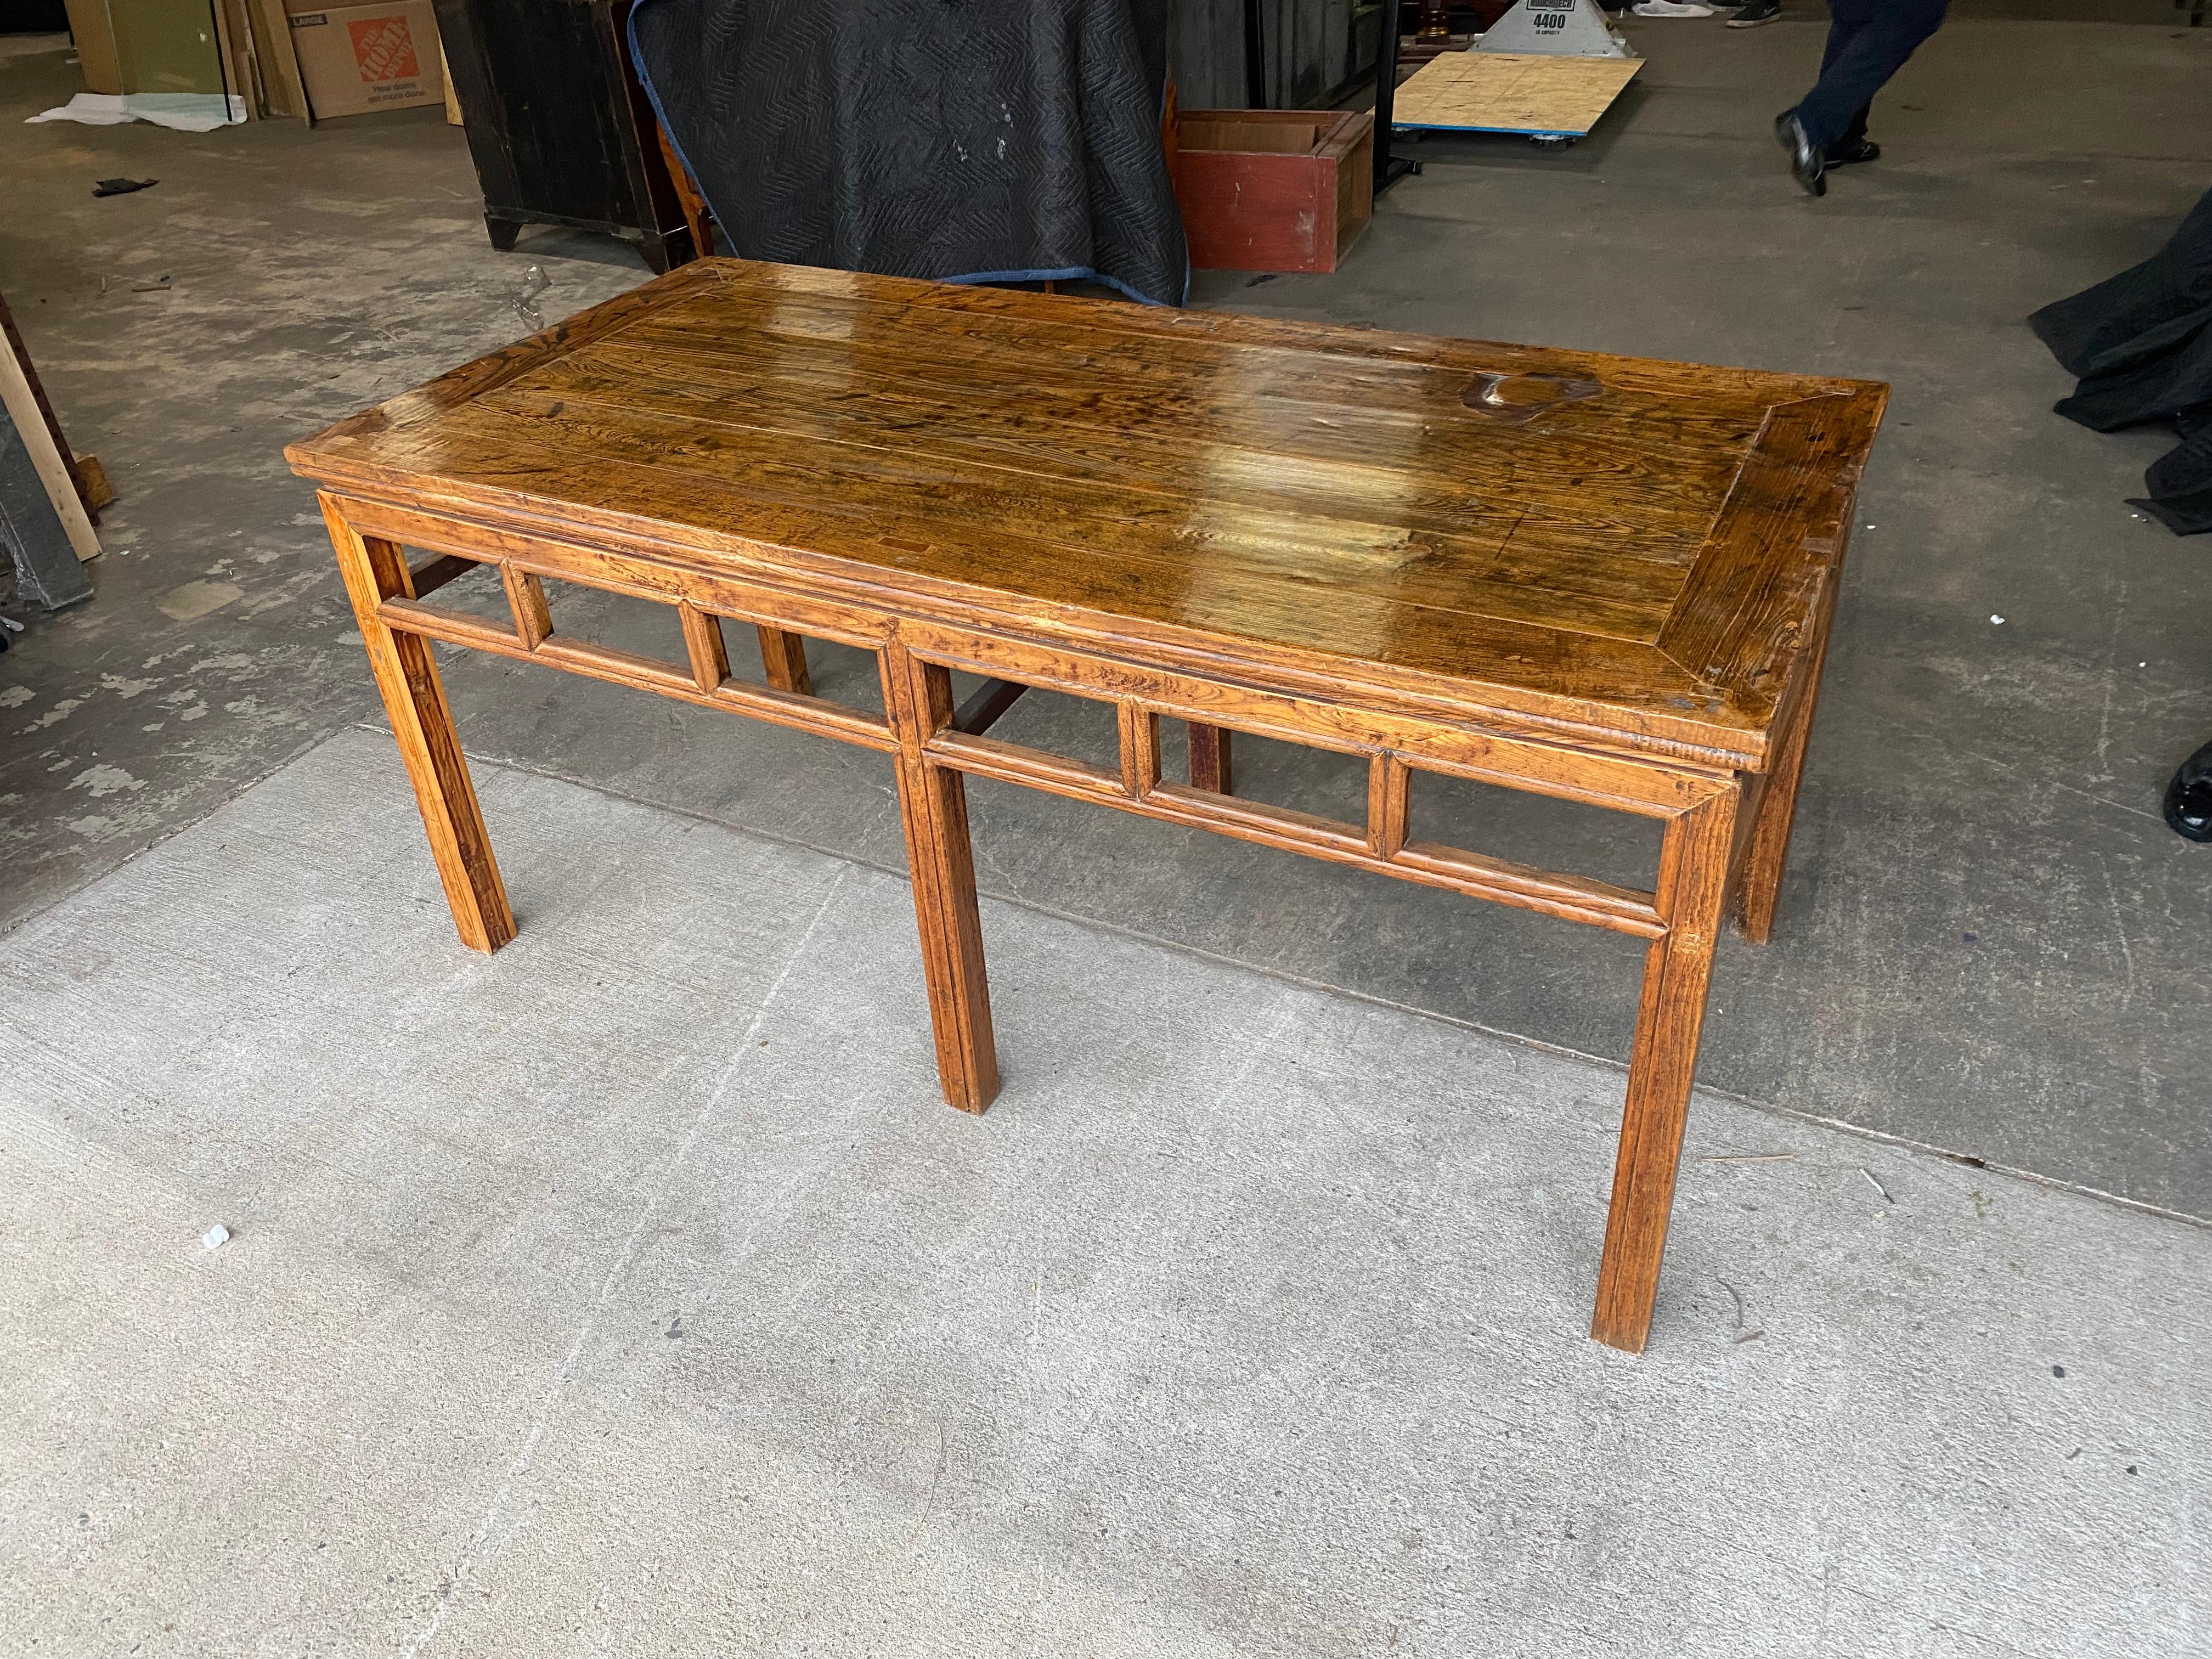 19th century Chinese hardwood console table- all mortised throughout

Apron clears at 22